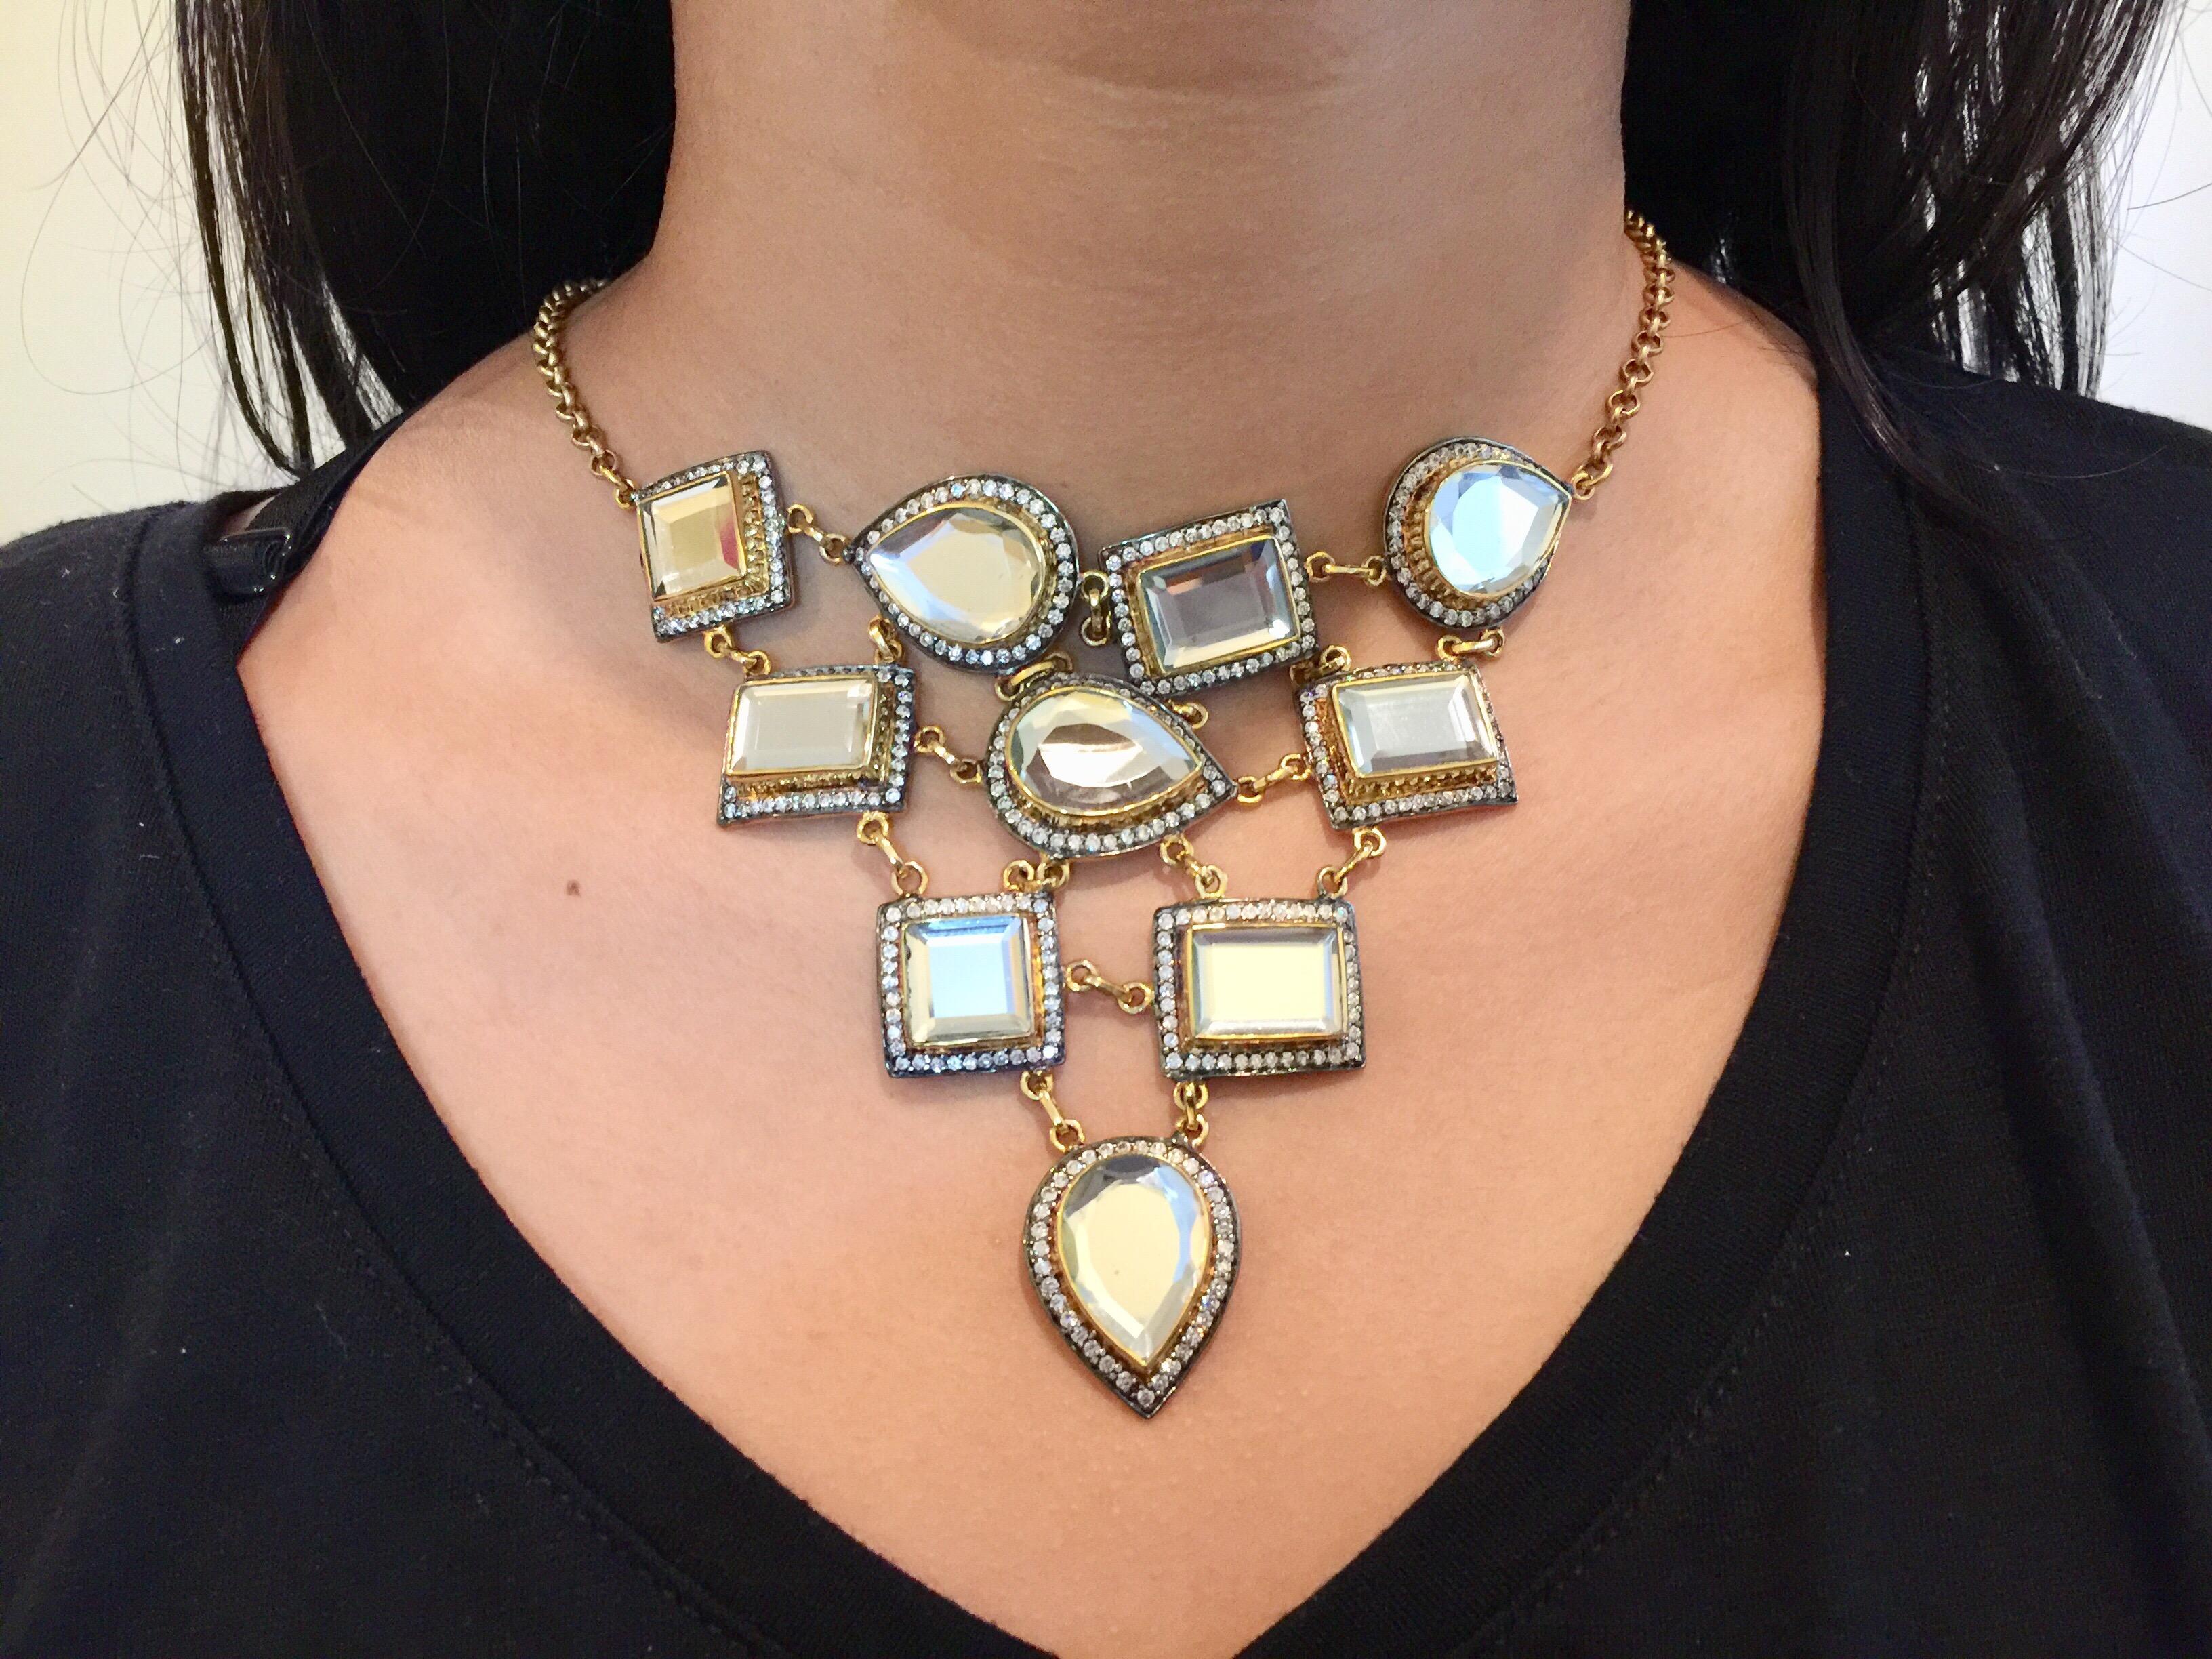 Polki Mirror Bib Meghna Jewels Statement Necklace In New Condition For Sale In Hoffman Estates, IL